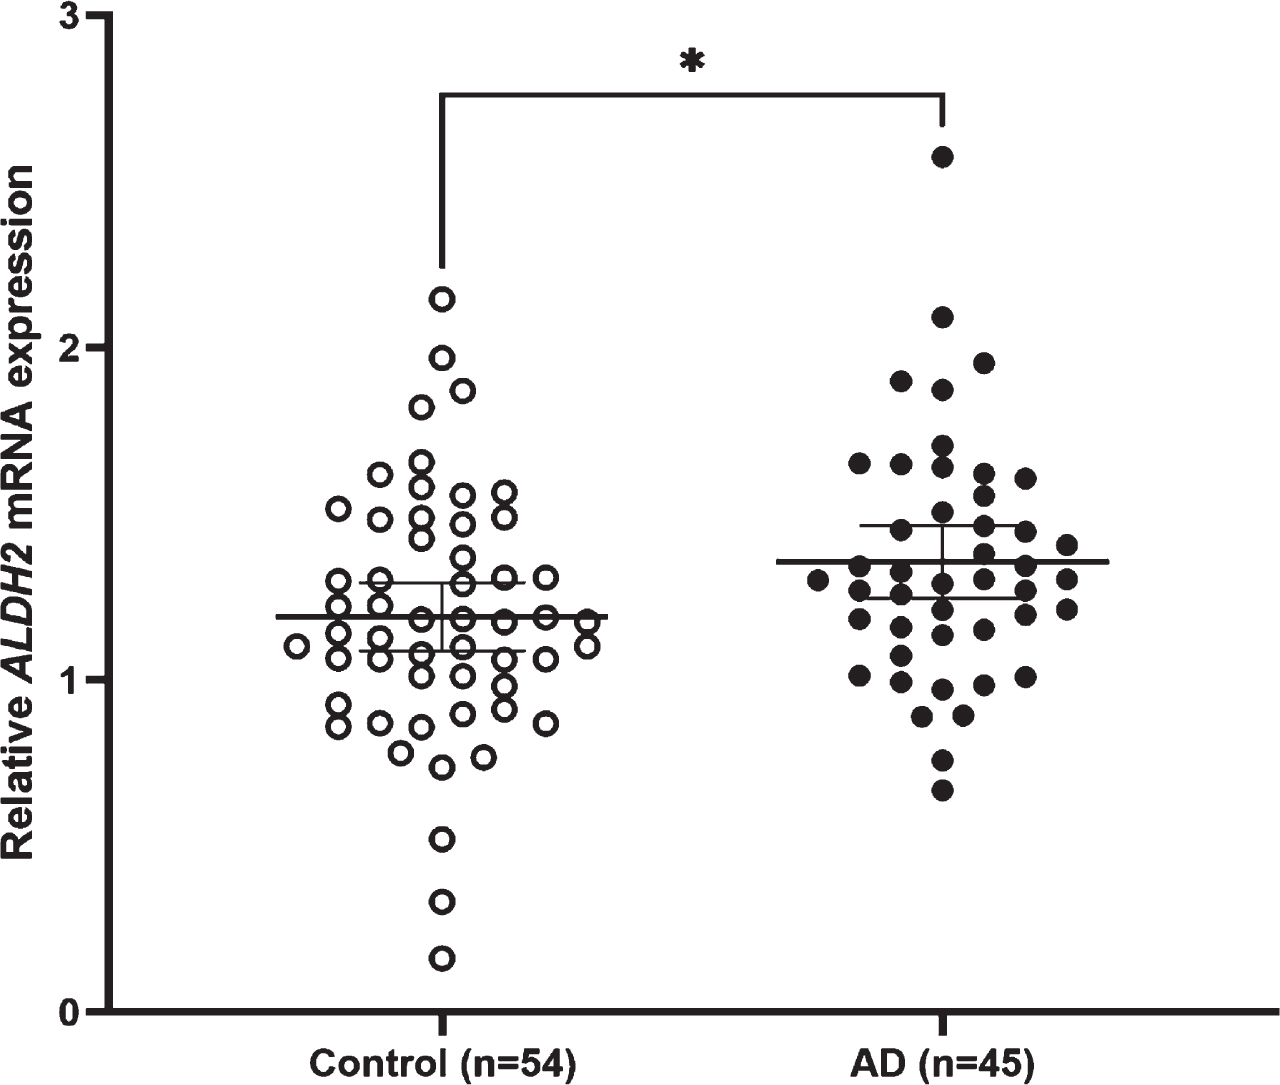 Relative ALDH2 mRNA expression levels in AD and control subjects. The mean expression level is significantly higher in AD subjects (1.35±0.36) than in control subjects (1.19±0.38) (Student’s t-test, p = 0.030). Lines are at means with 95% CI.